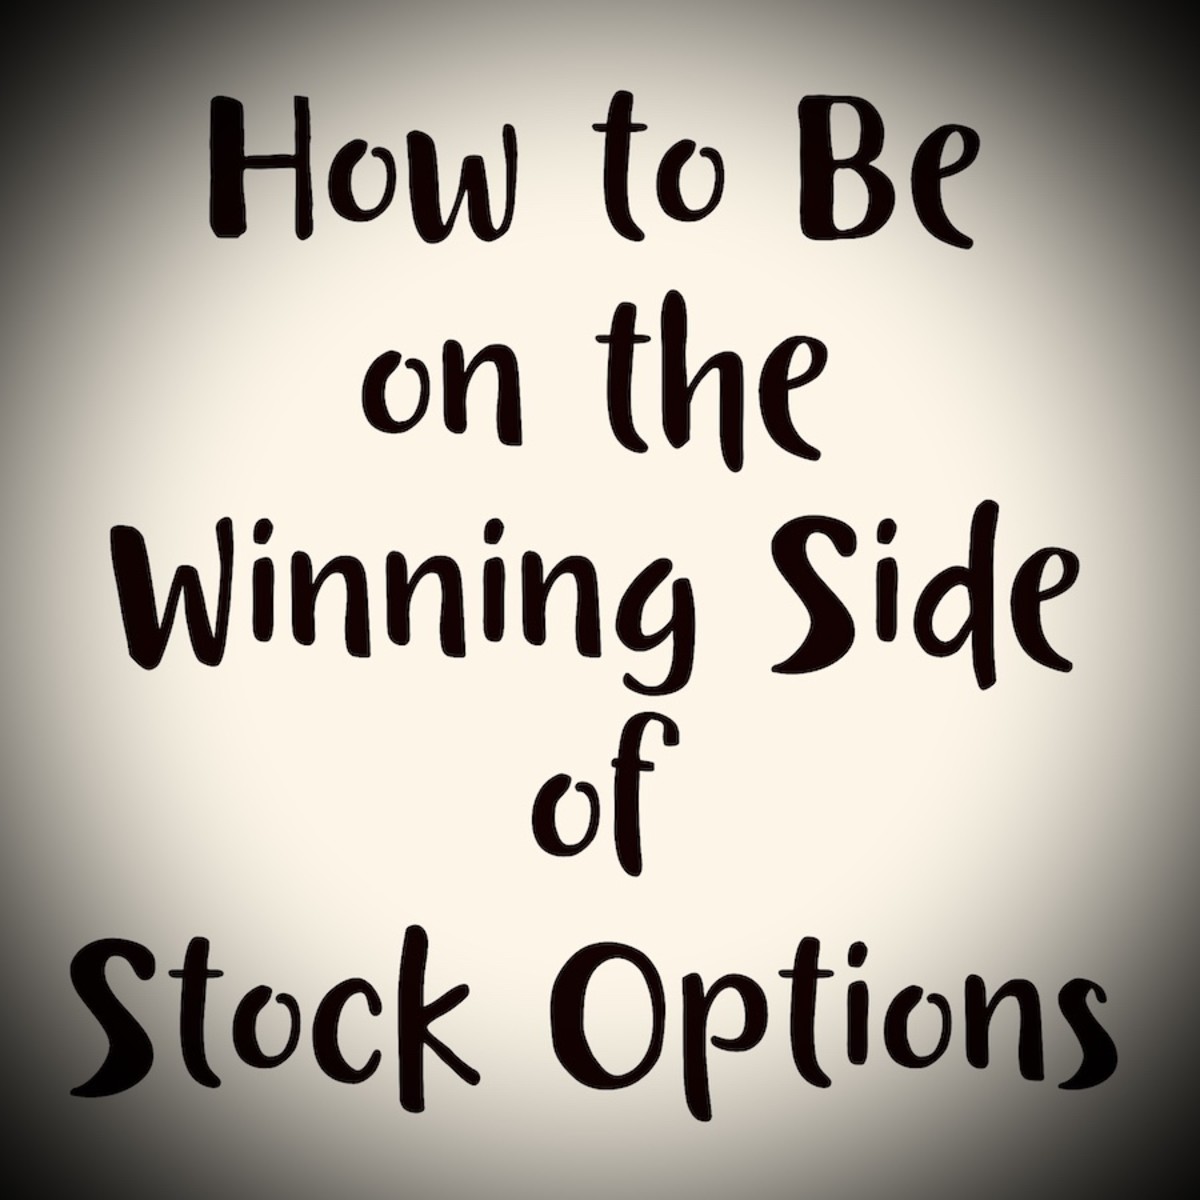 You can control what happens when you sell stock options short for profit.